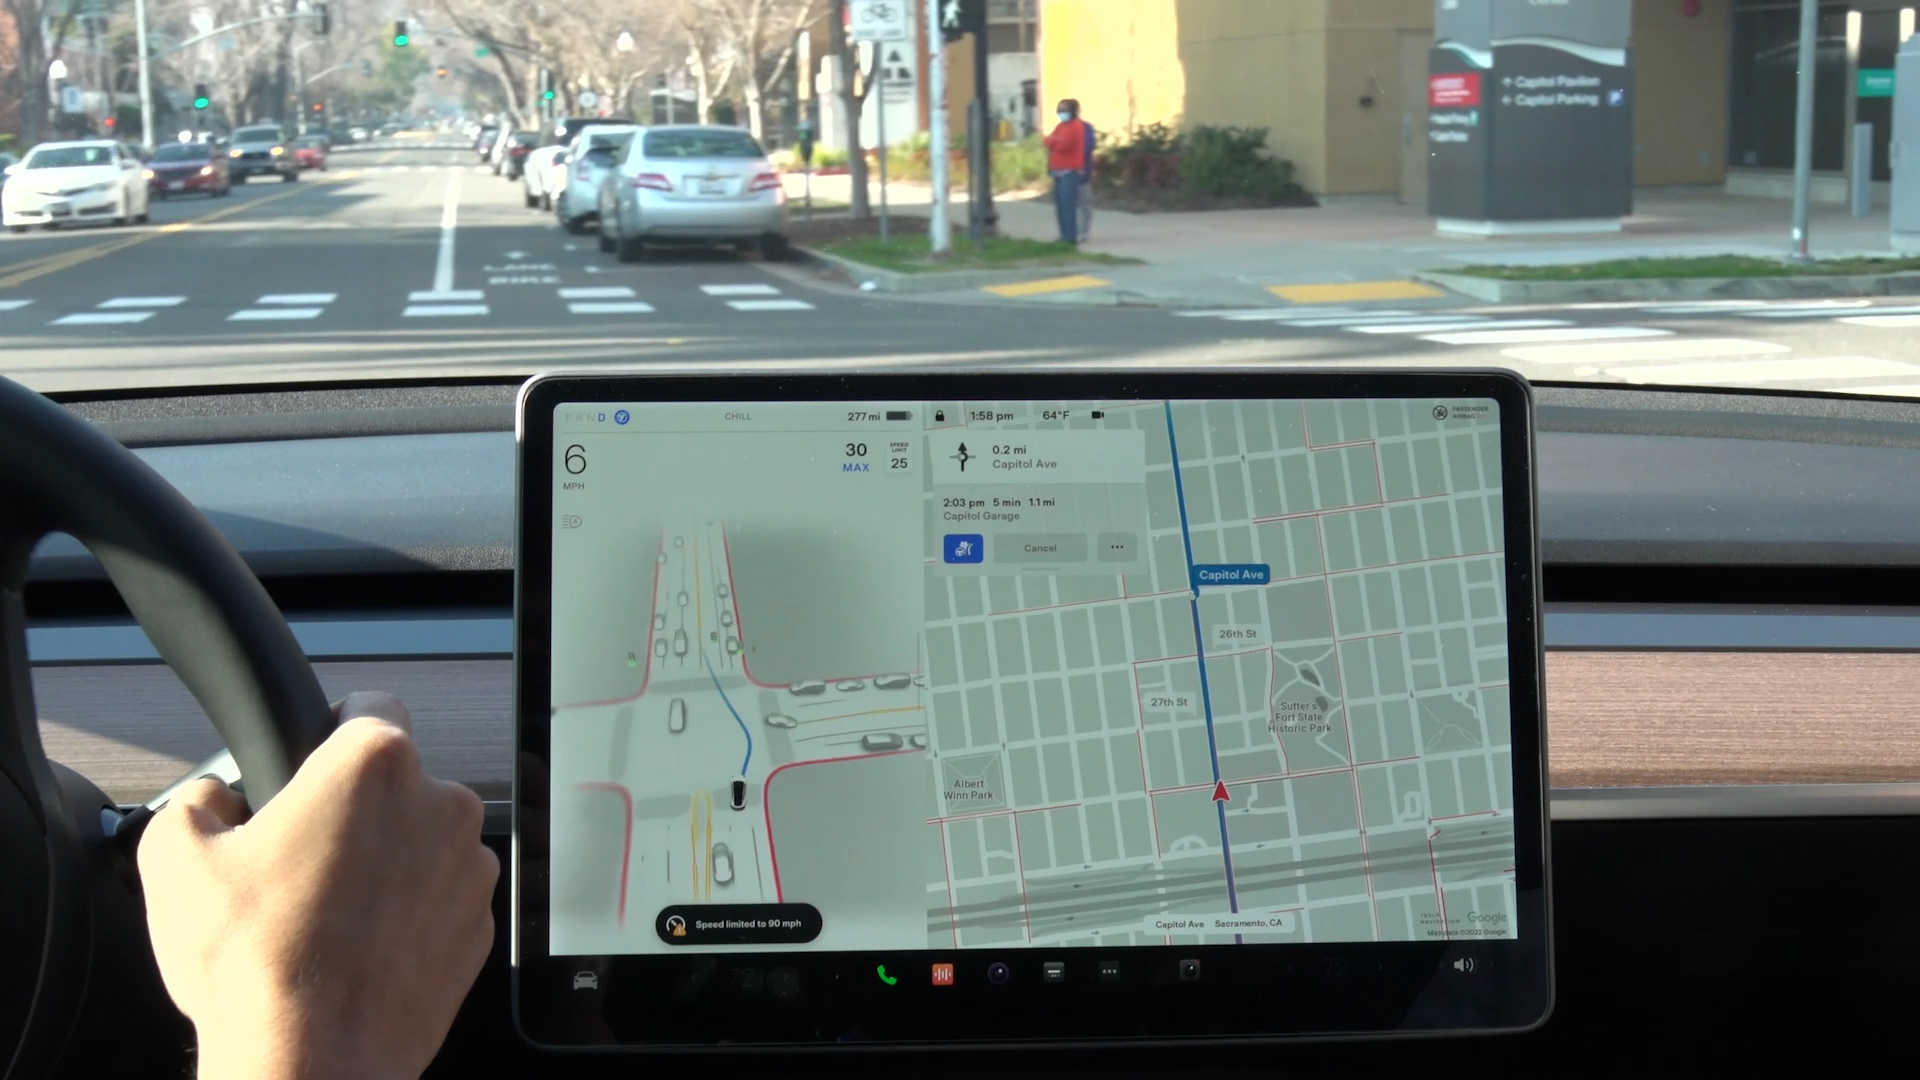 Are Teslas allowed to learn with the own car? DriveLab